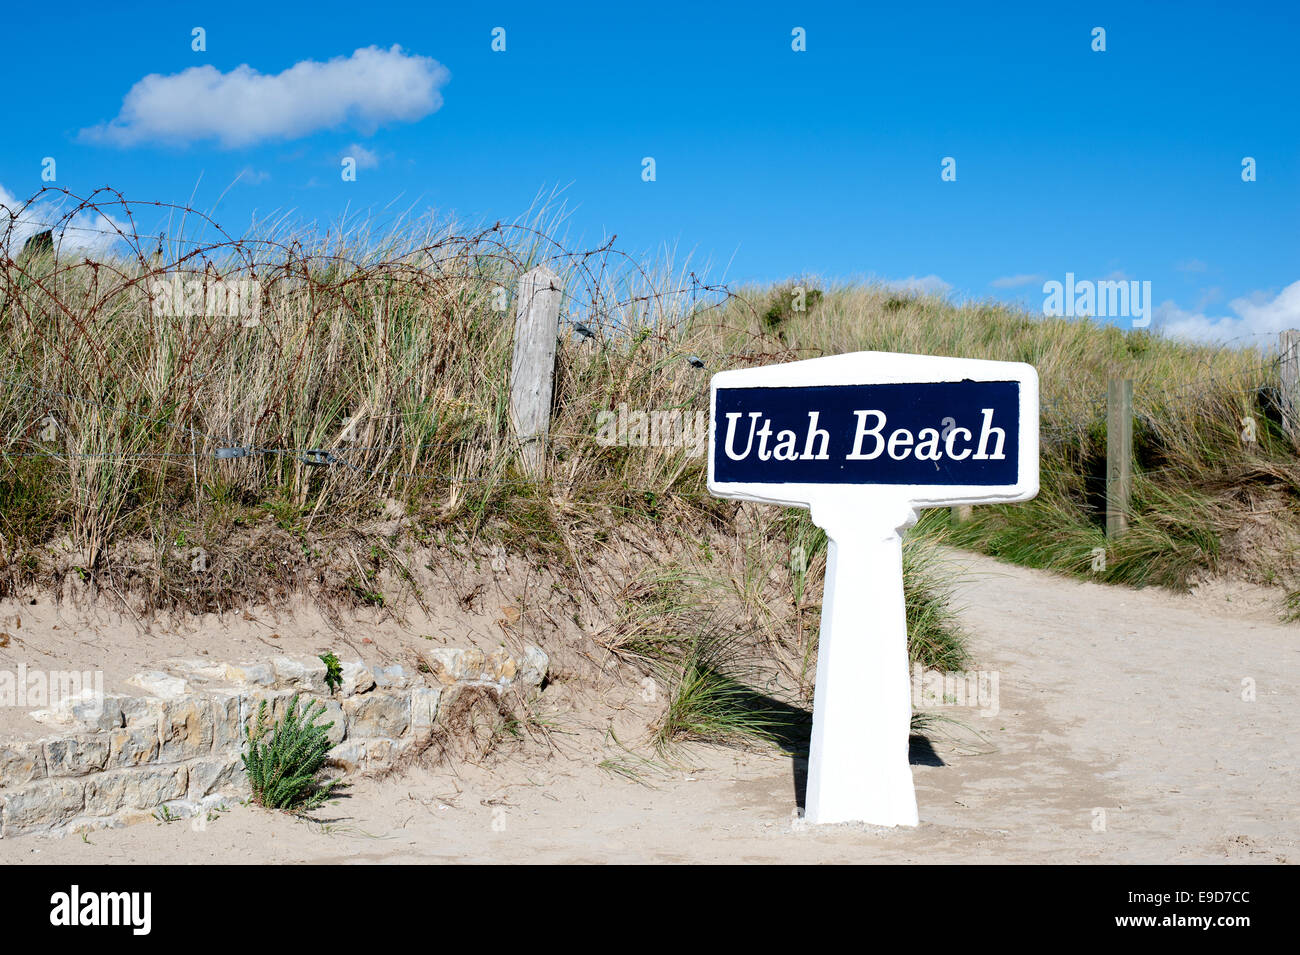 Utah Beach is one of the five Landing beaches in the Normandy landings on 6 June 1944, during World War II. Utah is located on t Stock Photo